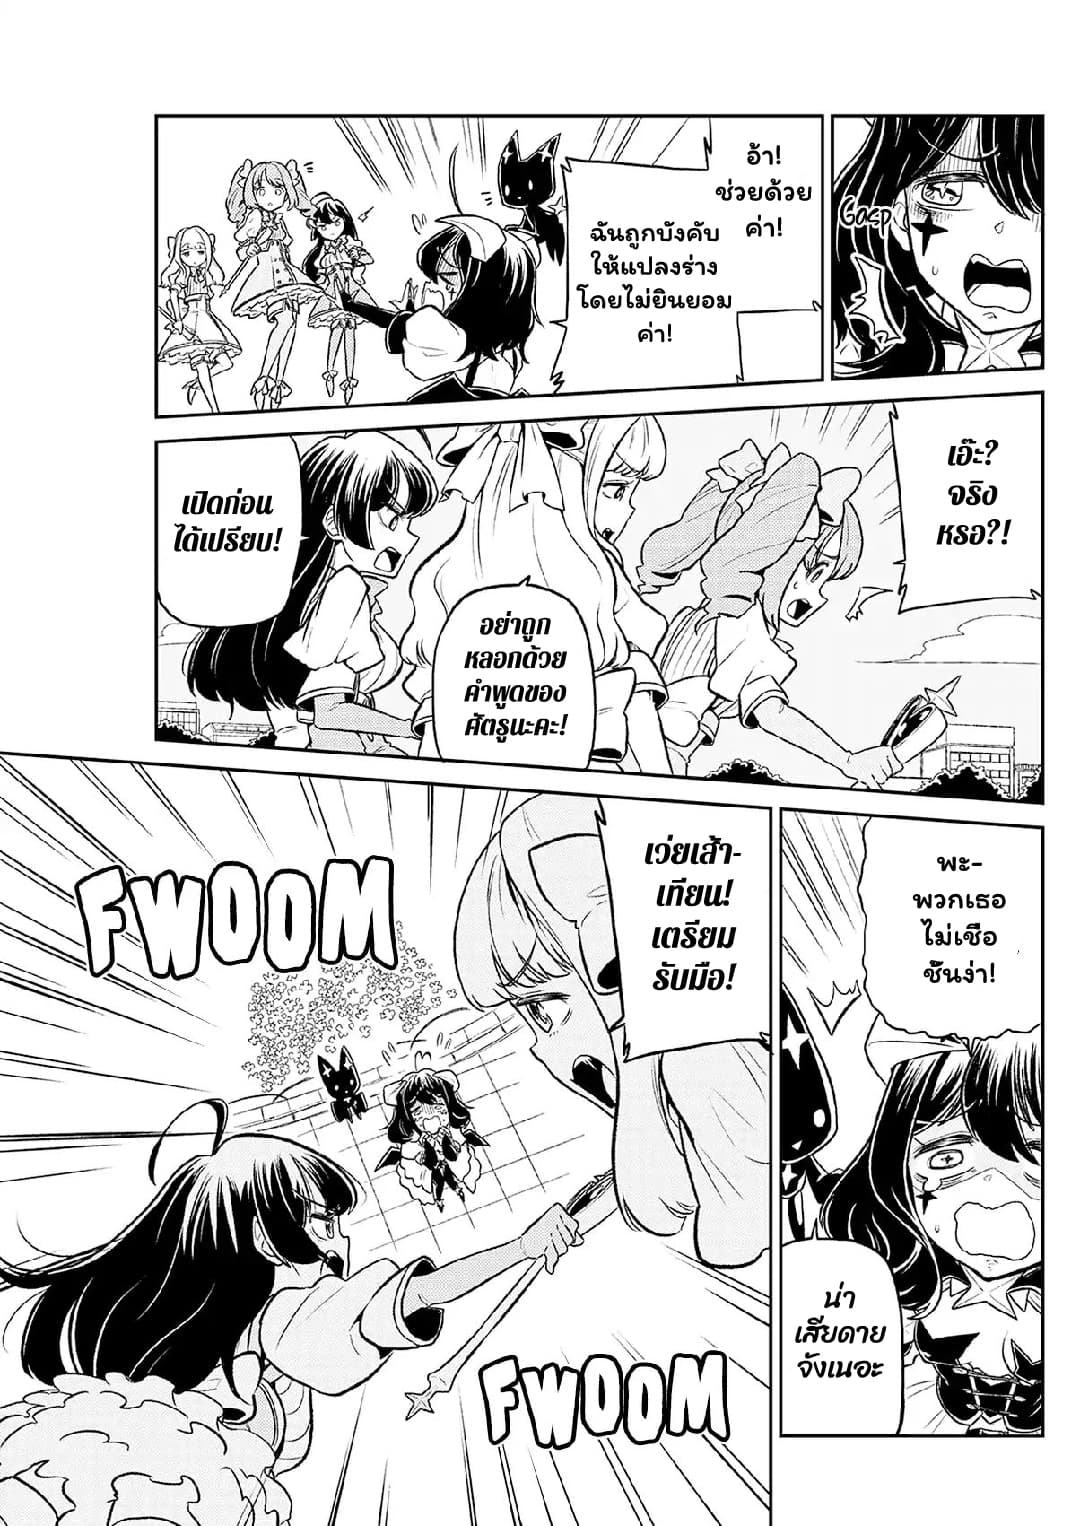 Looking up to Magical Girls 1 (10)